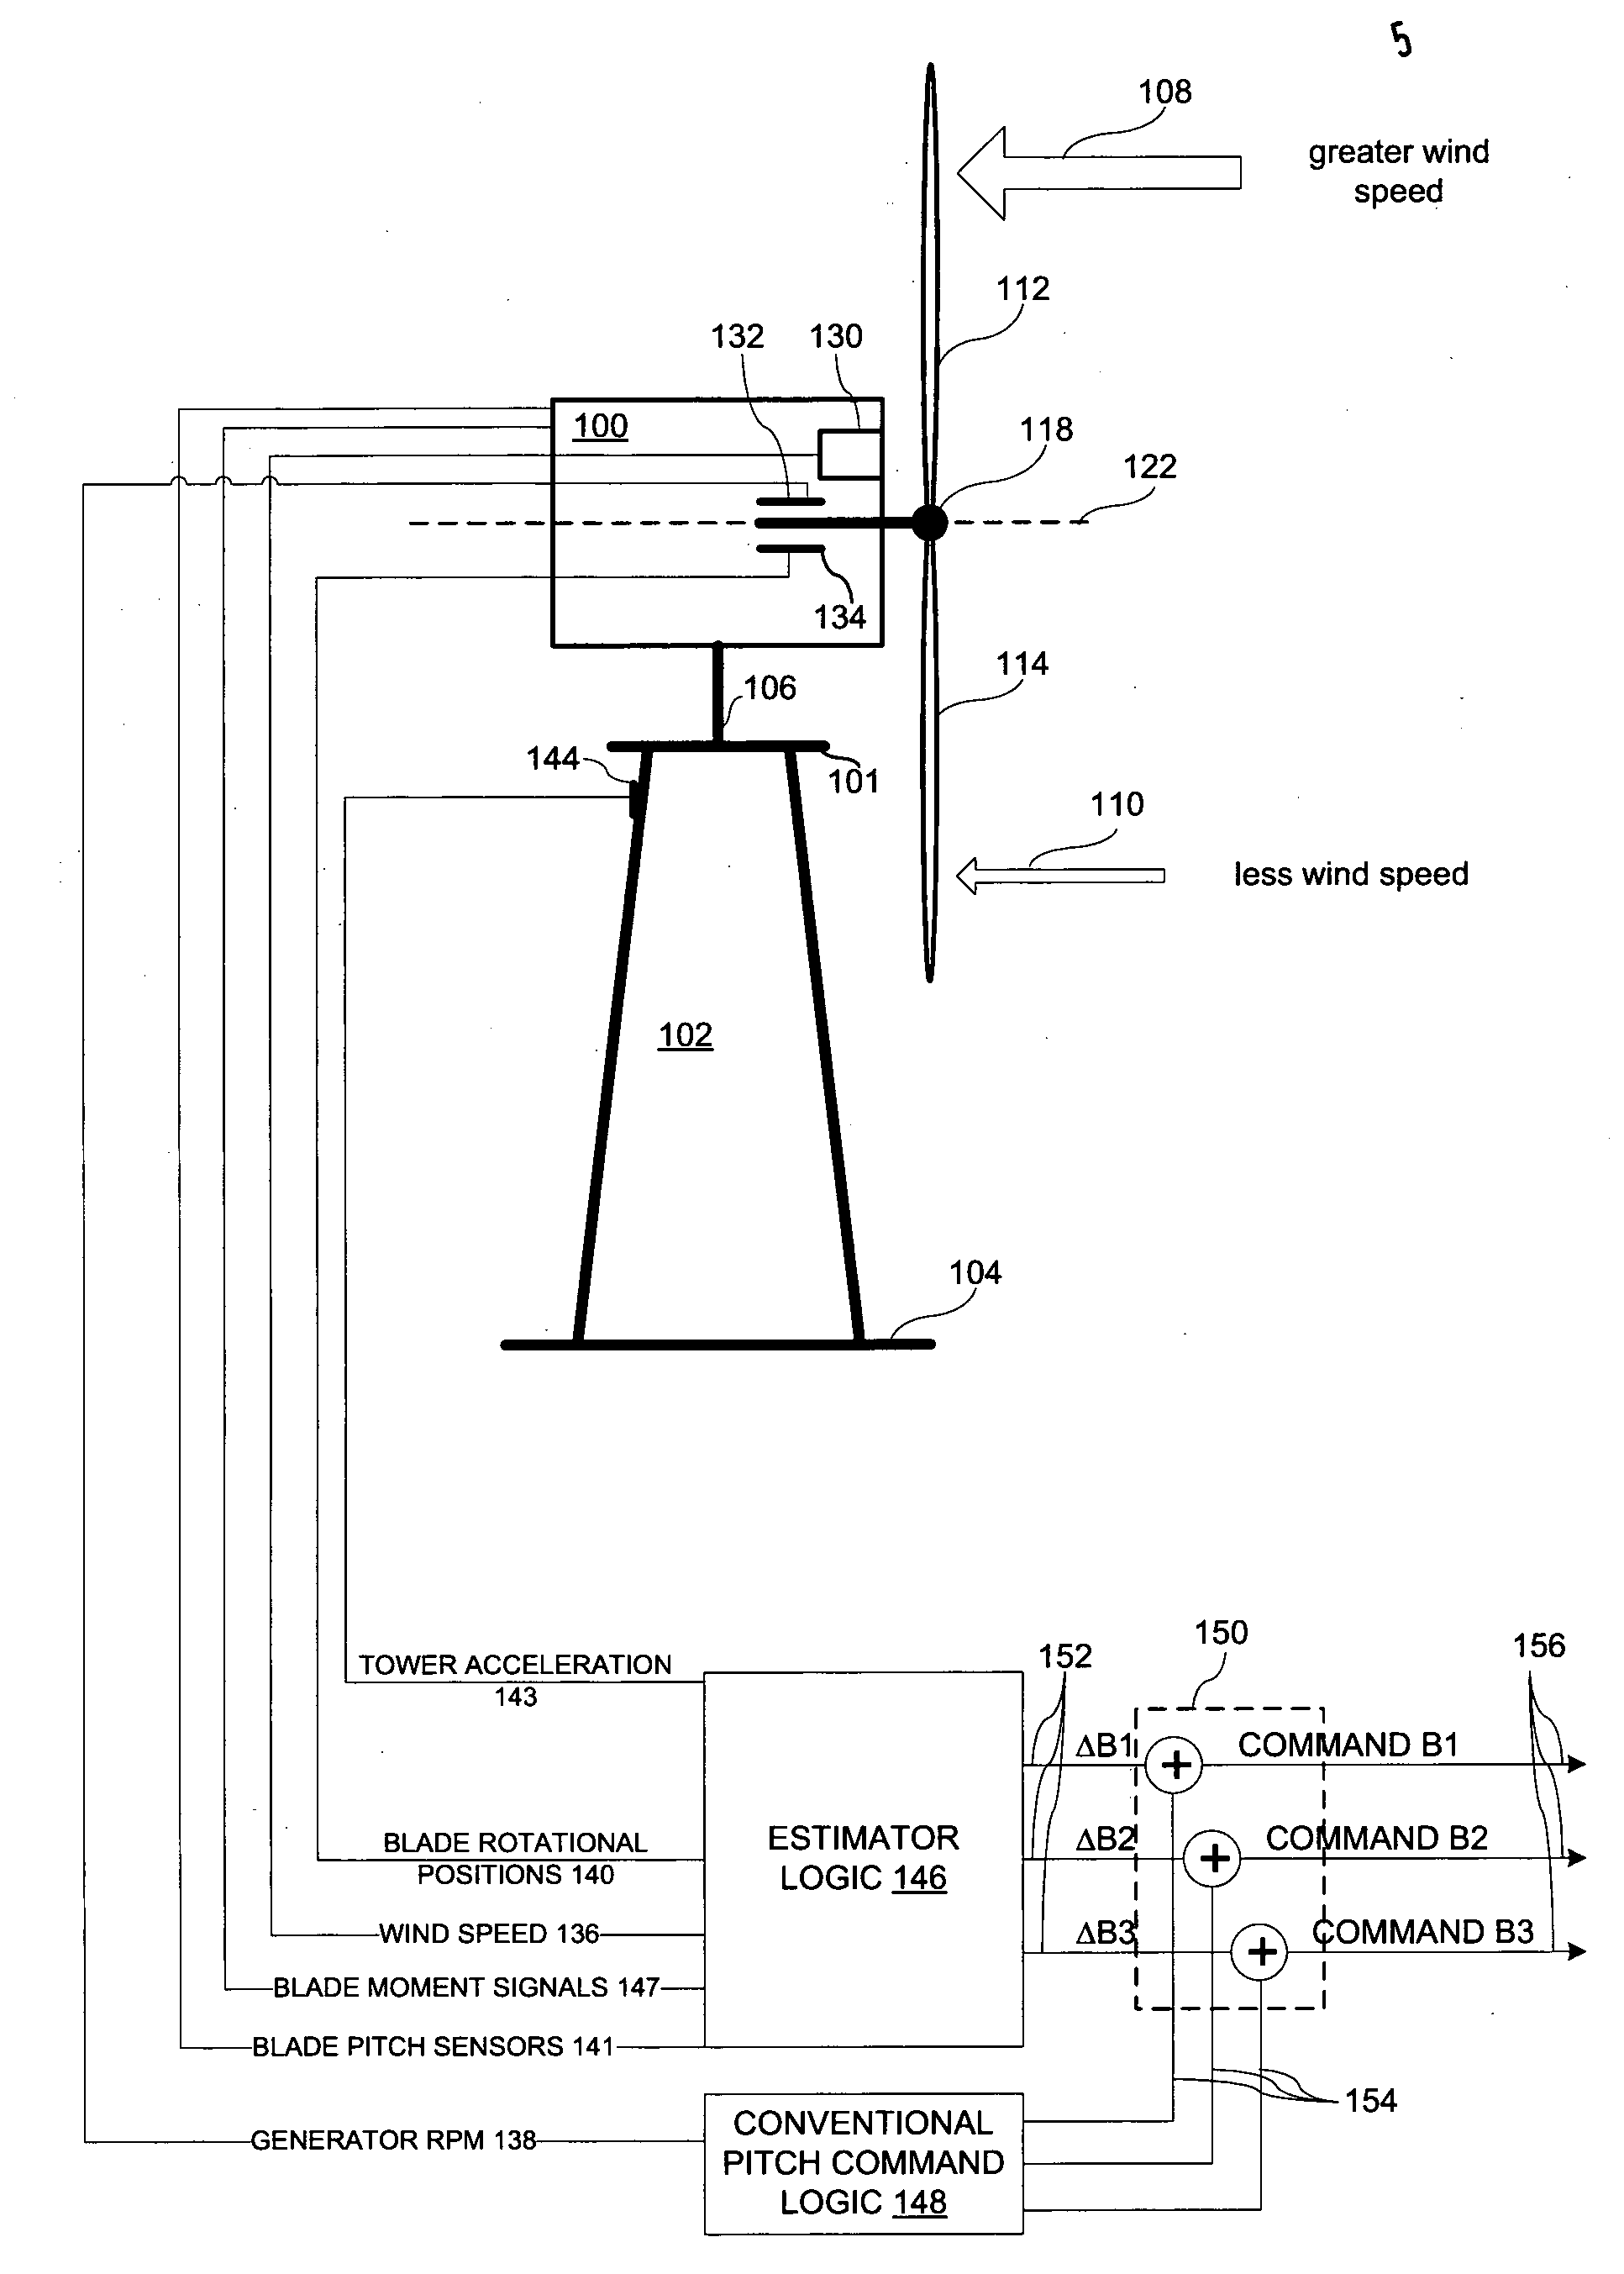 Wind turbine damping of tower resonant motion and symmetric blade motion using estimation methods